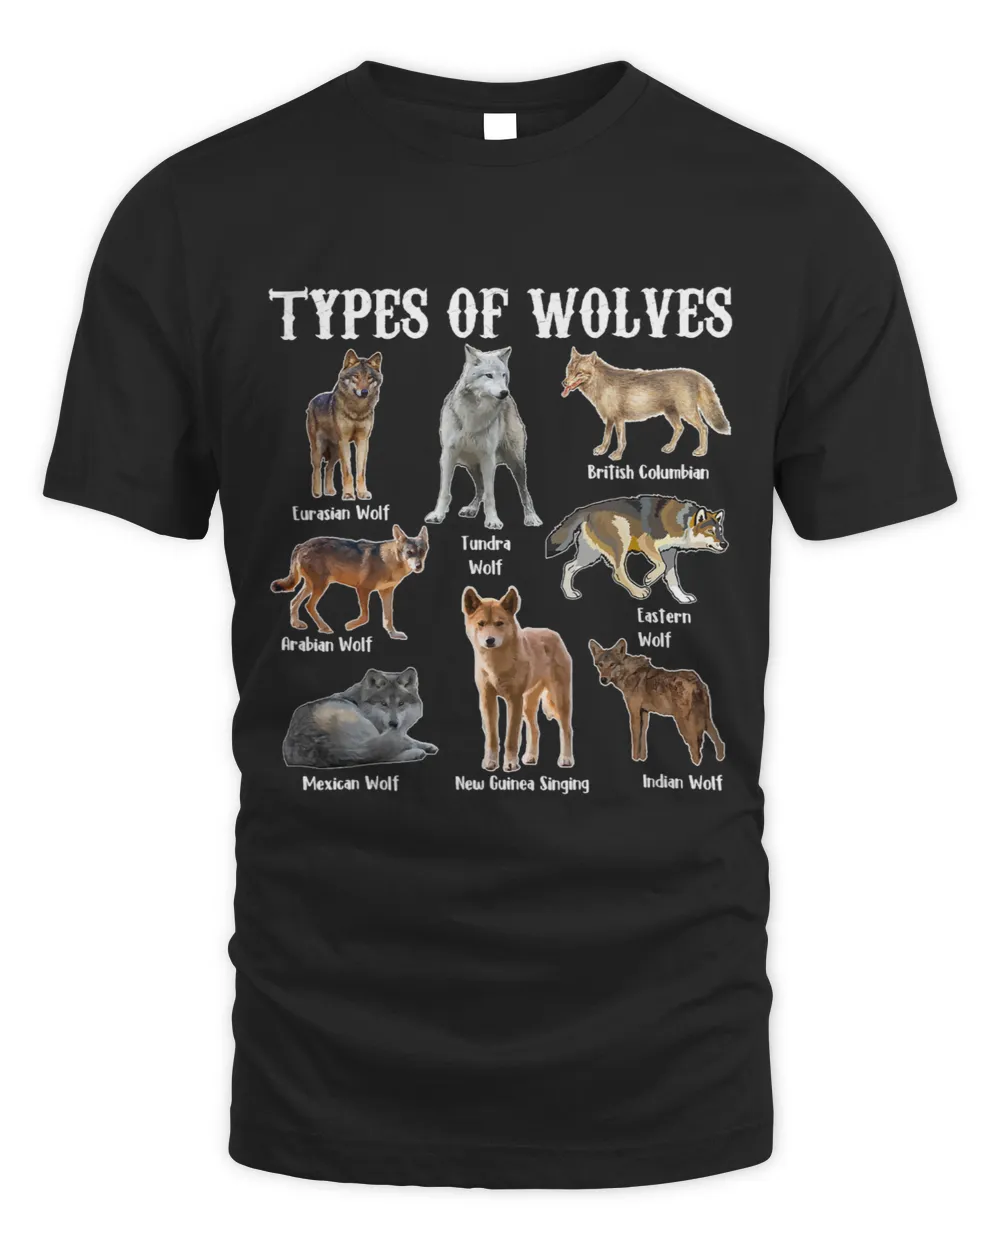 Wolf Lover Types of Wolves Shirt Howling Wolf Shirt Type of Wolves